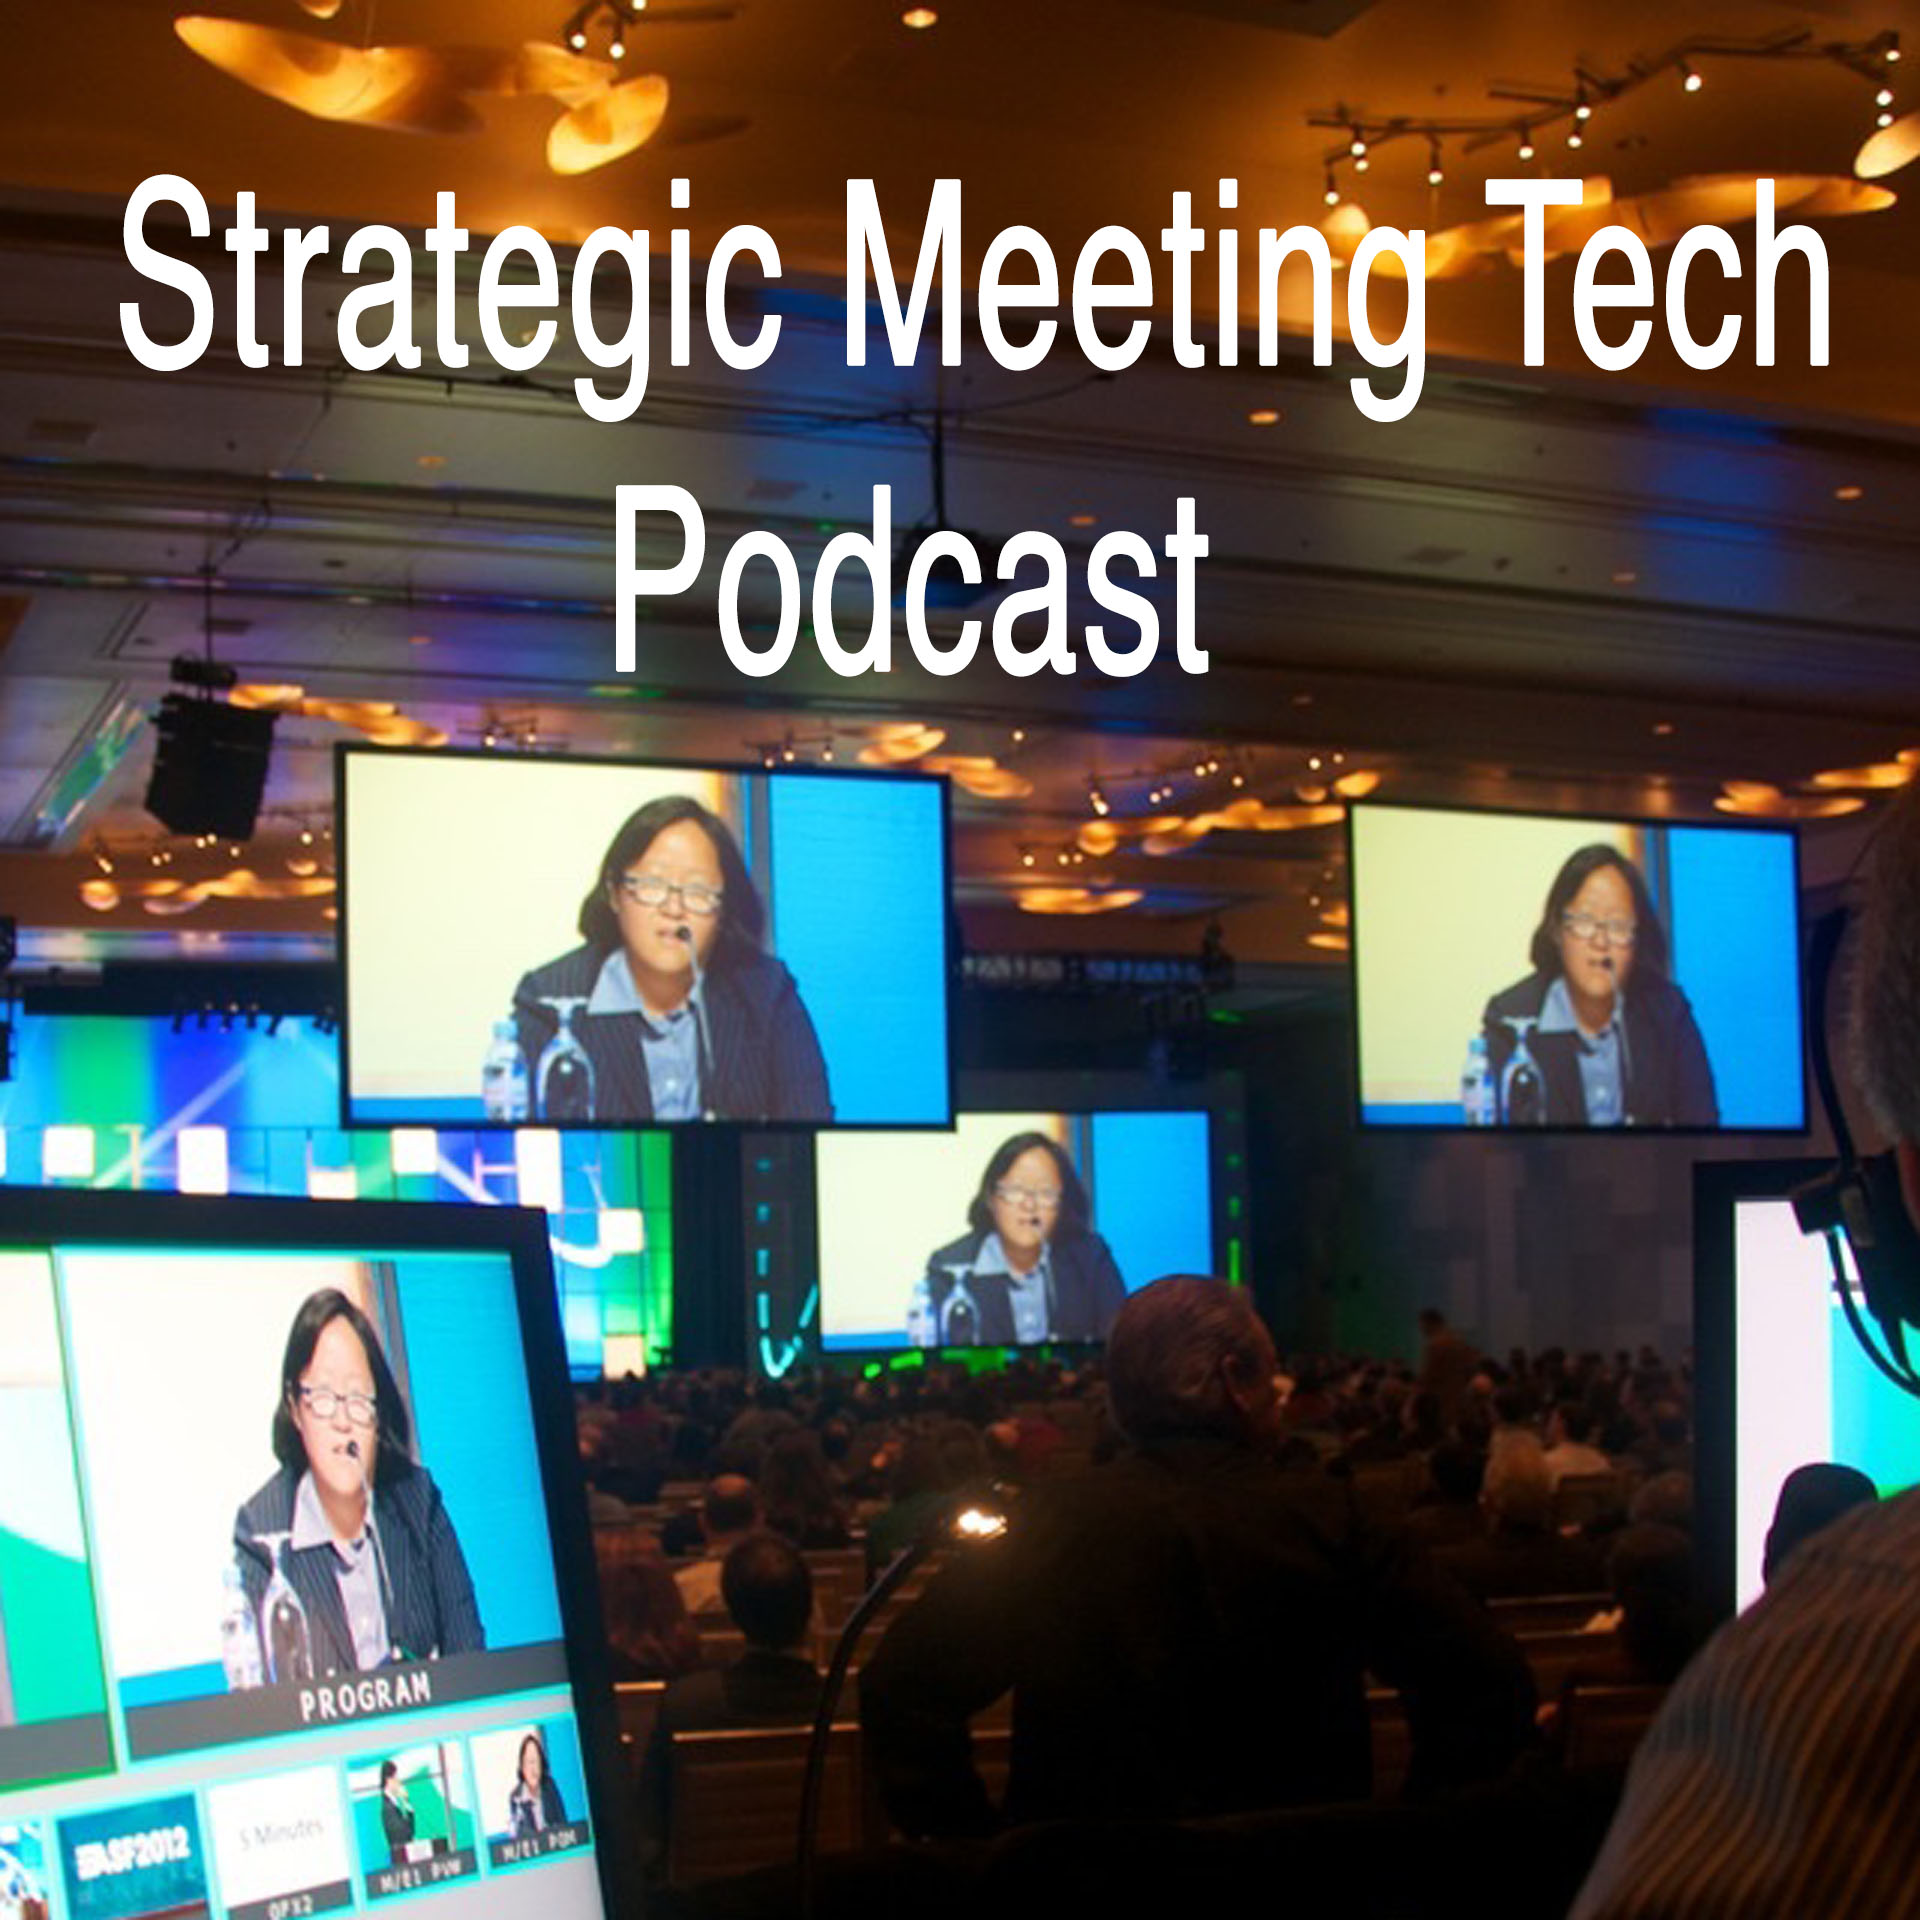 Strategic Meeting Tech Podcast Show #26 - Tracy Stuckrath discusses ways to best accommodate vegetarian attendees 